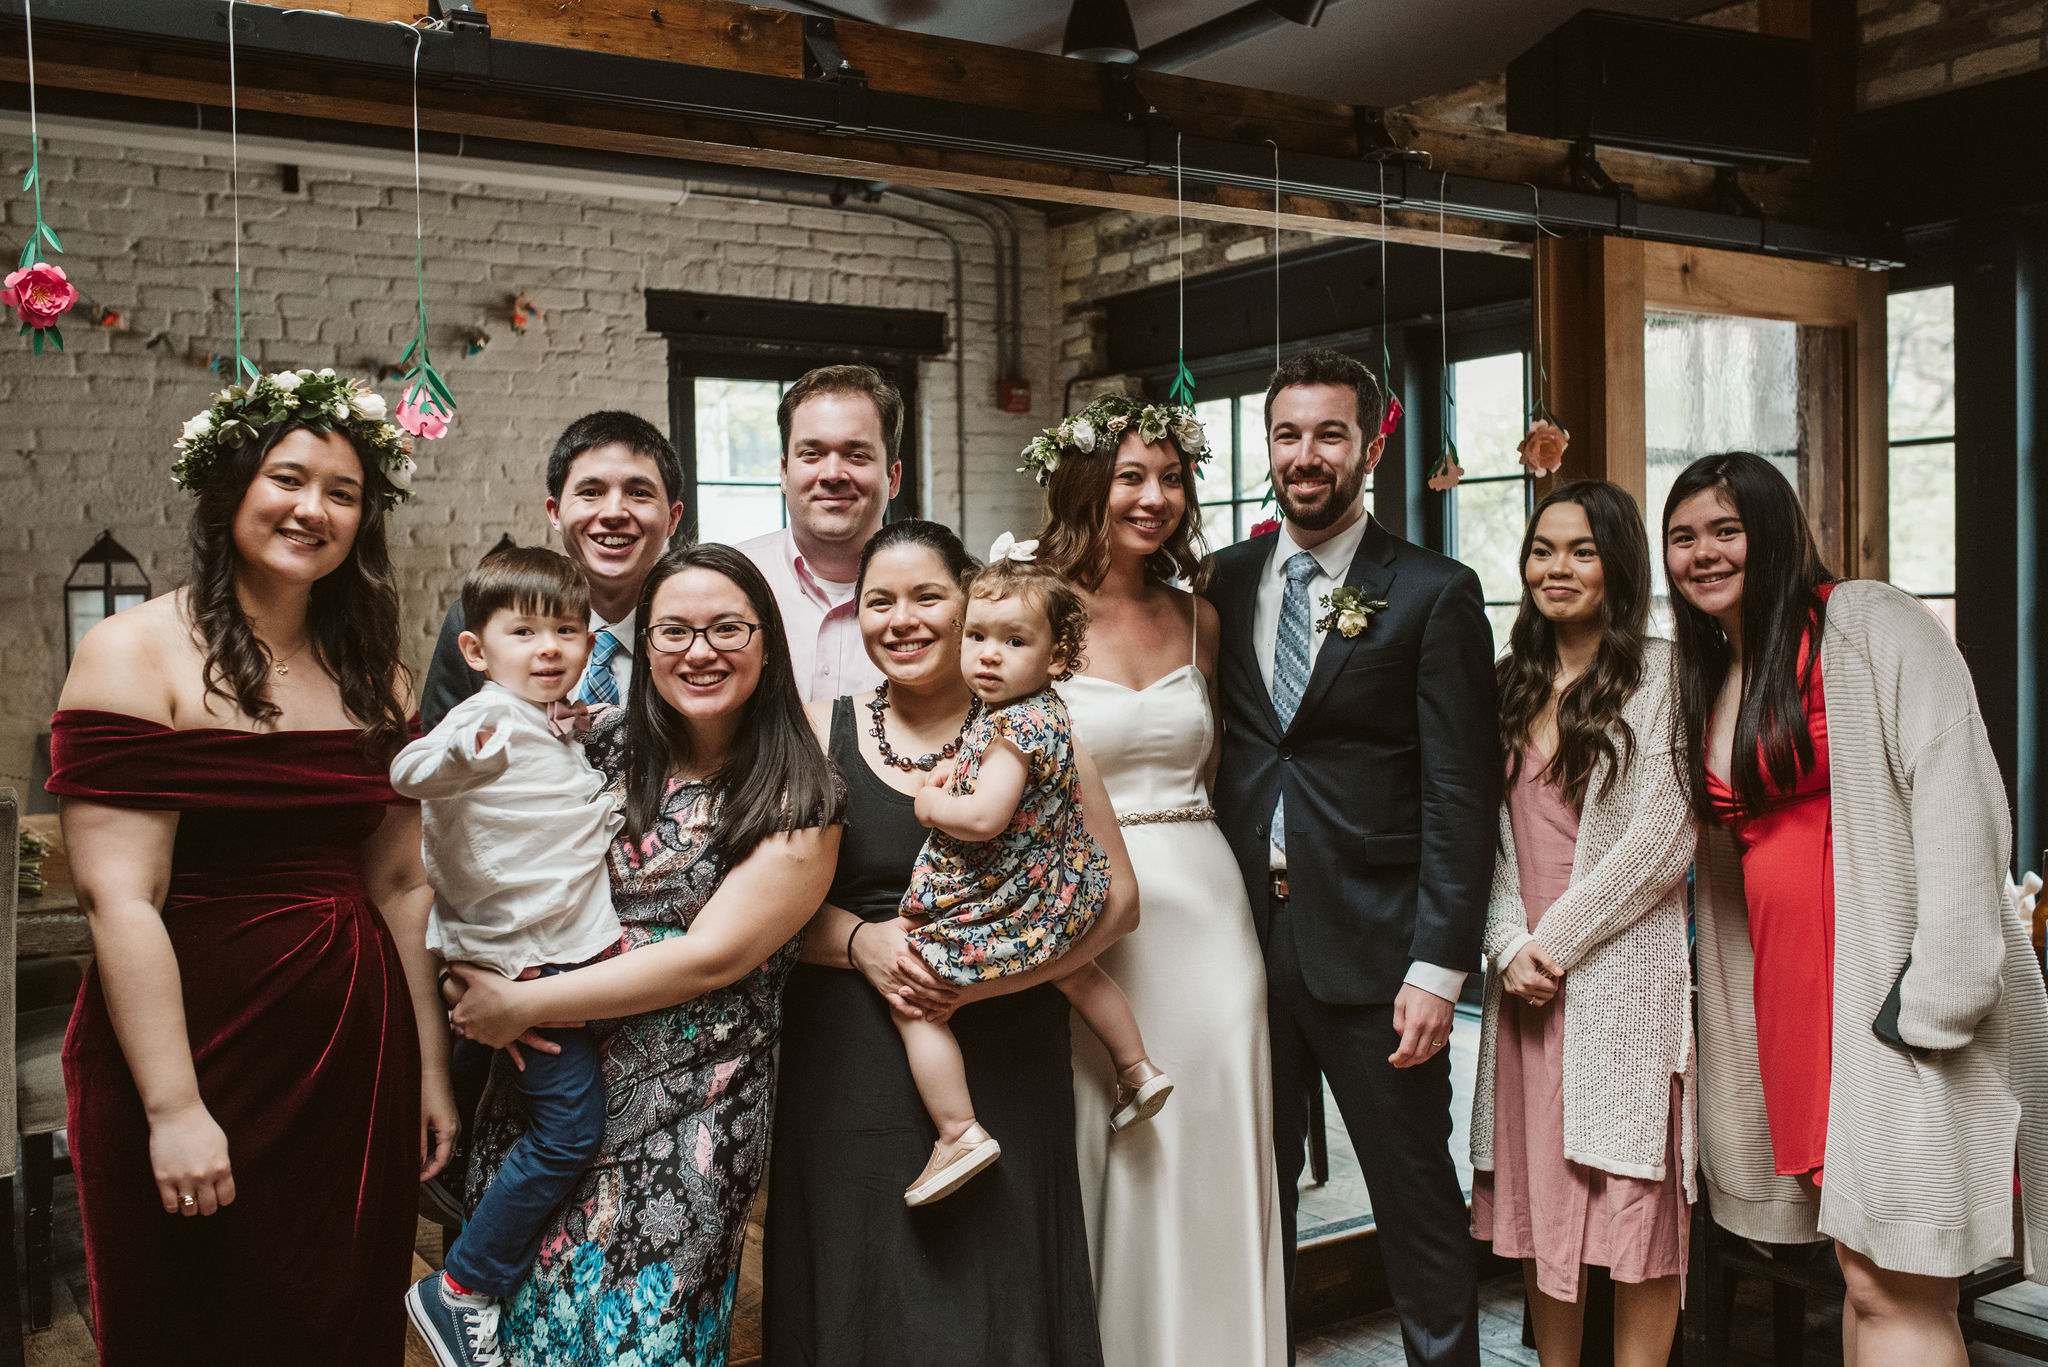  Washington DC, Baltimore Wedding Photographer, Alexandria, Old Town, Jewel Tone, Romantic, Modern, Virtue Feed &amp; Grain, Portrait of Bride and Groom with Friends and Family 